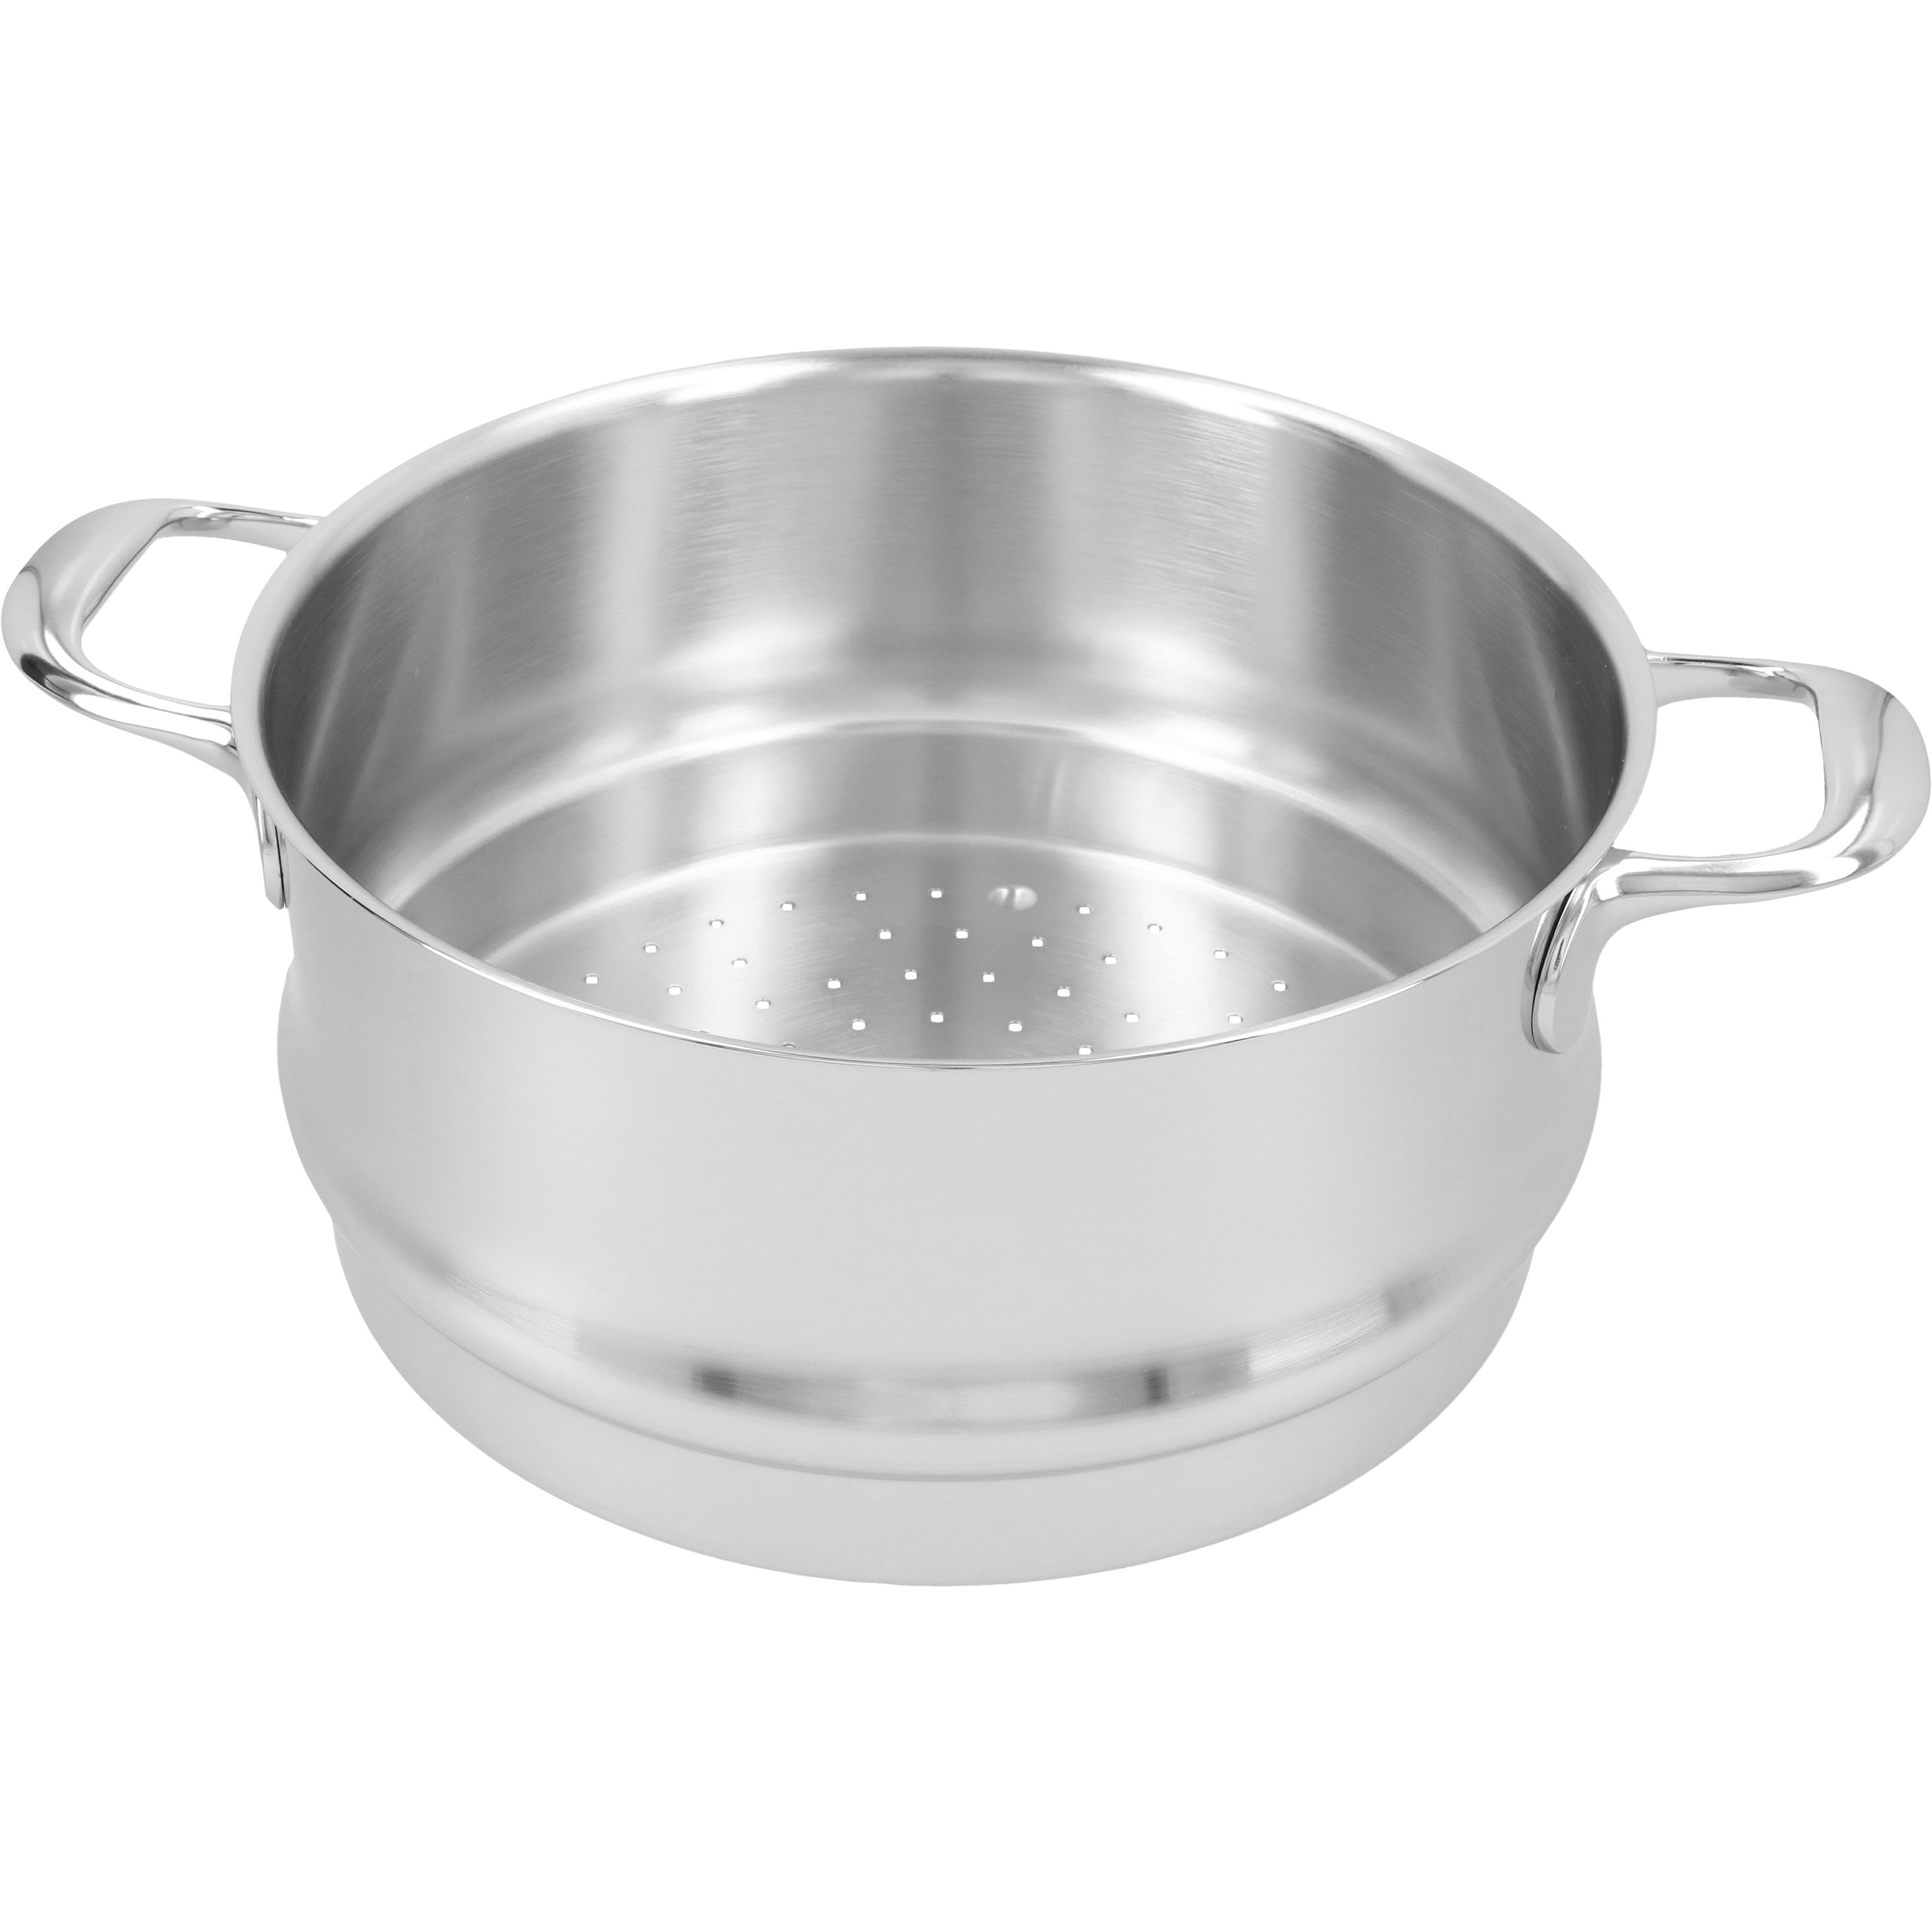 Demeyere Multi-Use Mini Stockpot with Steaming Basket, Stainless Steel